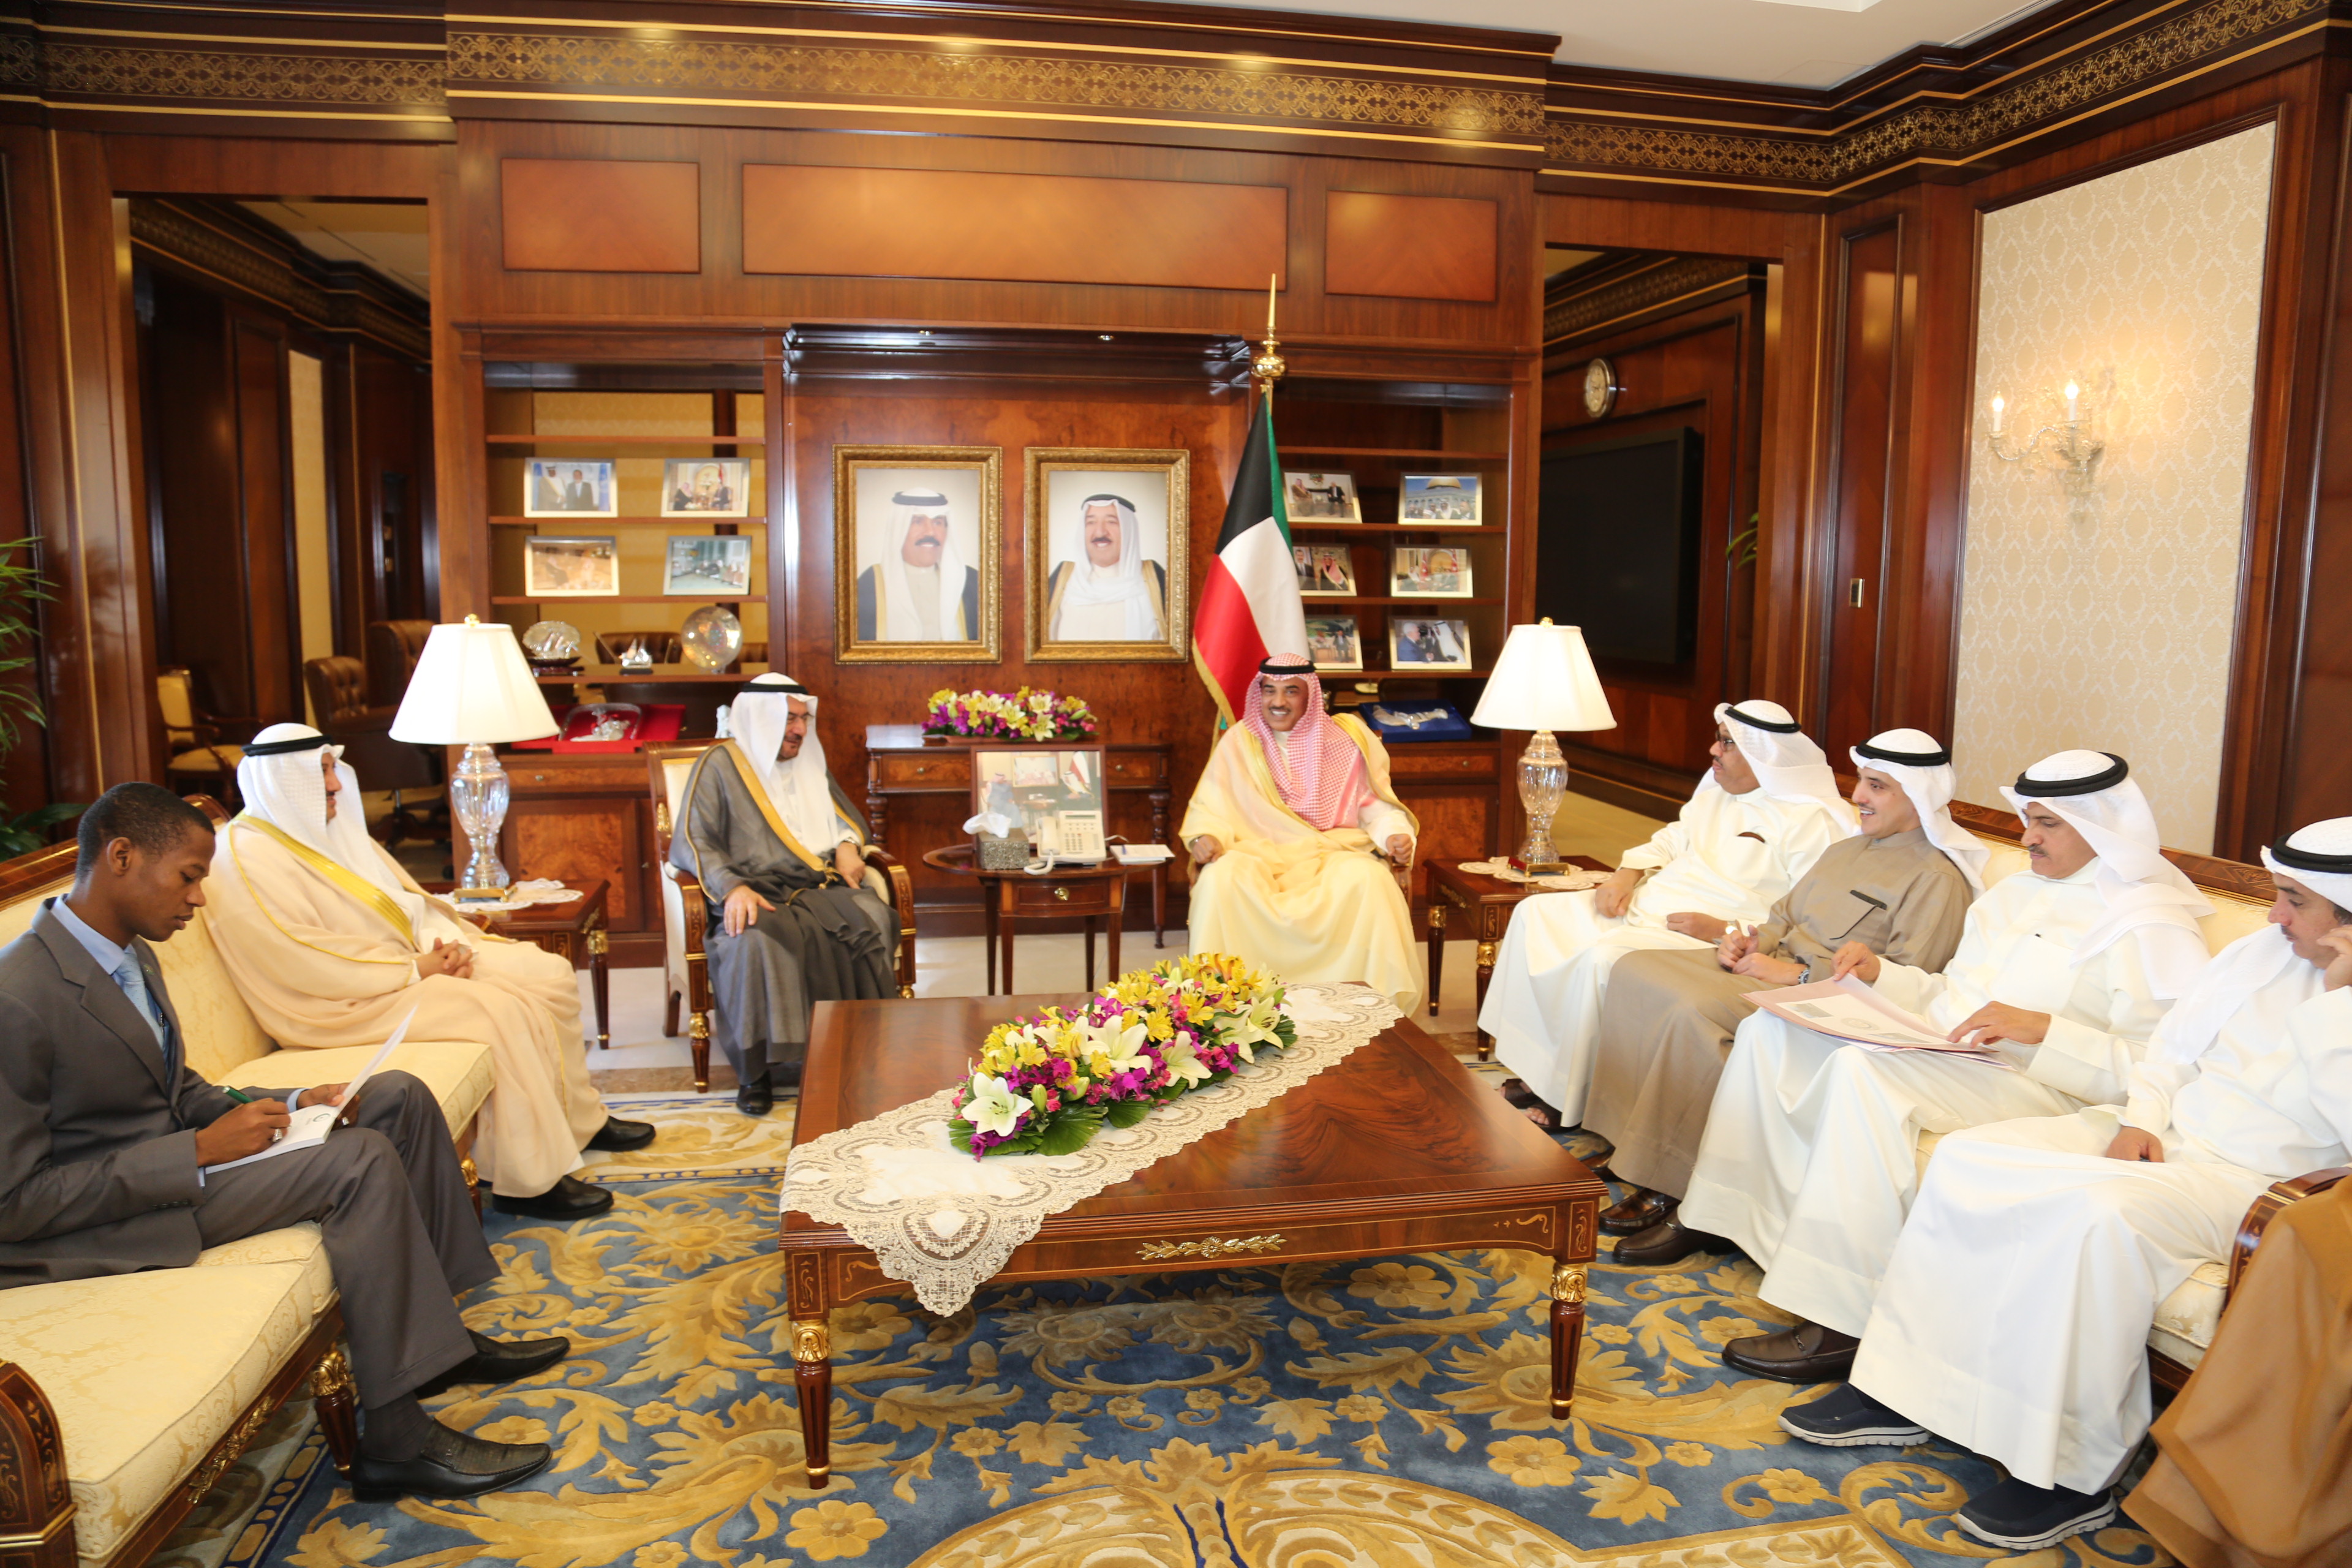 First Deputy Prime Minister and Foreign Minister Sheikh Sabah Al-Khaled Al-Hamad Al-Sabah on Tuesday receives Secretary-General of the Organization of Islamic Cooperation (OIC) Iyad Ameen Madani